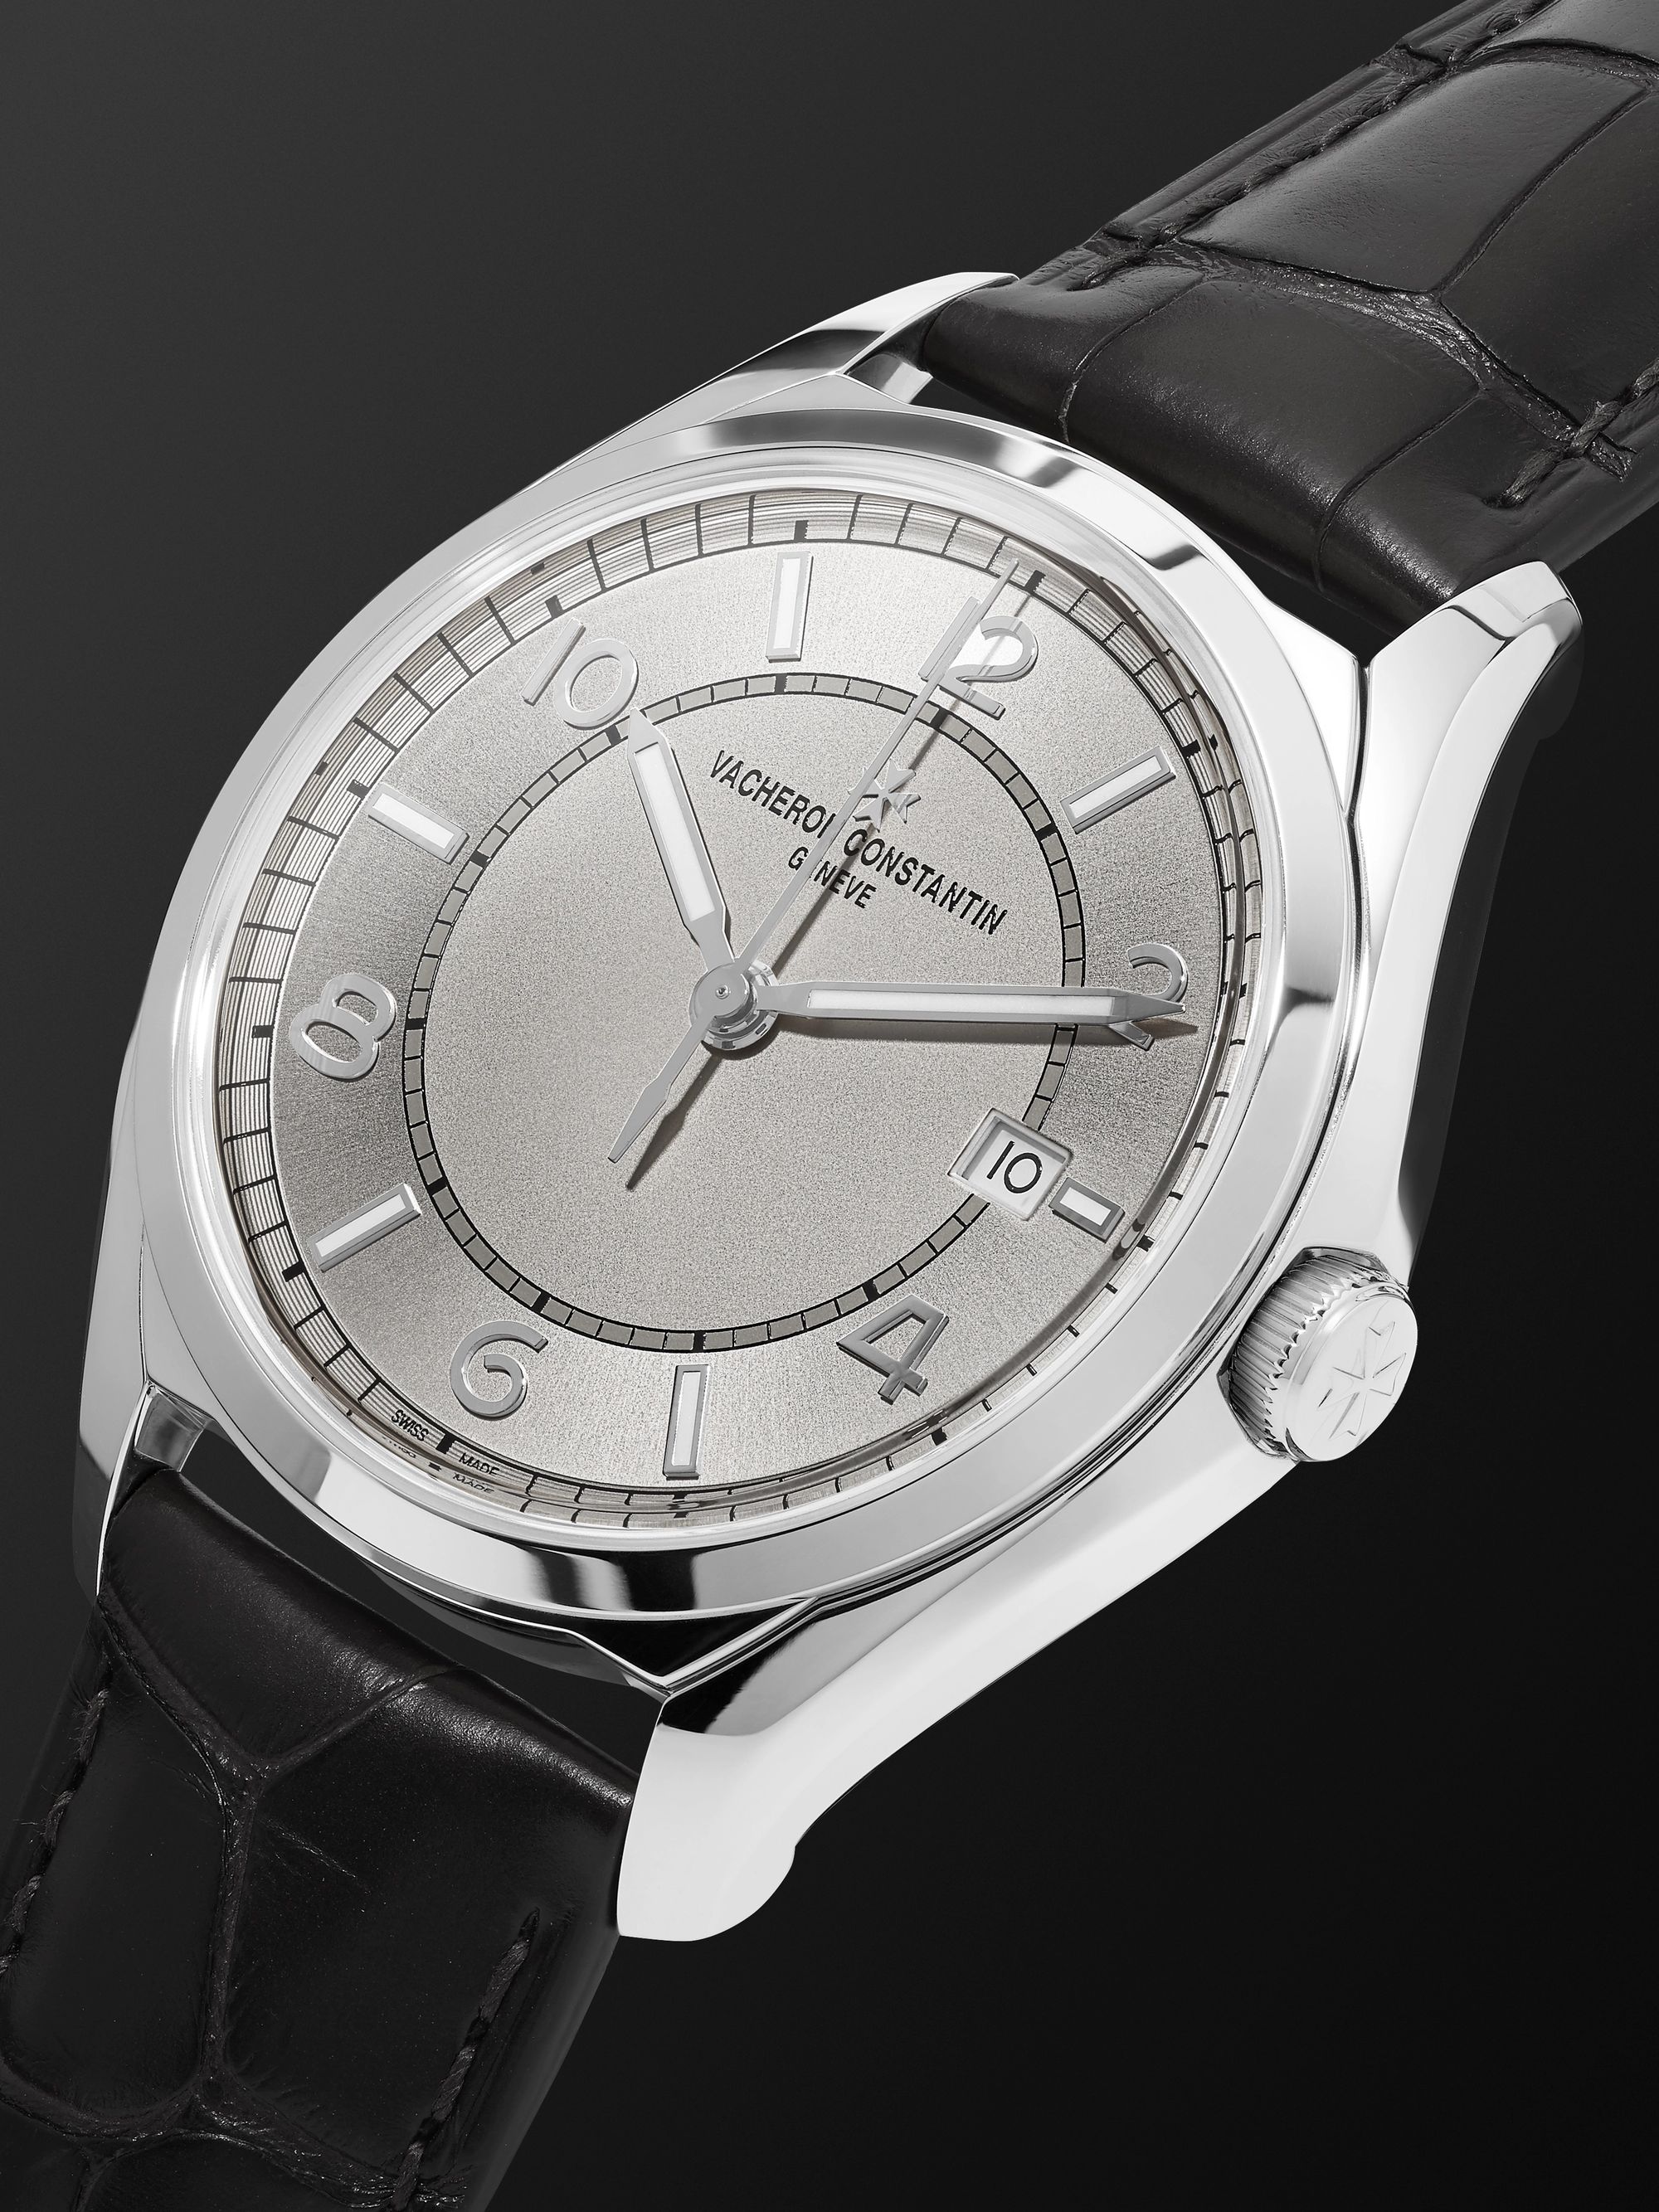 VACHERON CONSTANTIN Fiftysix Automatic 40mm Stainless Steel and Alligator Watch, Ref. No. 4600E/000A-B442